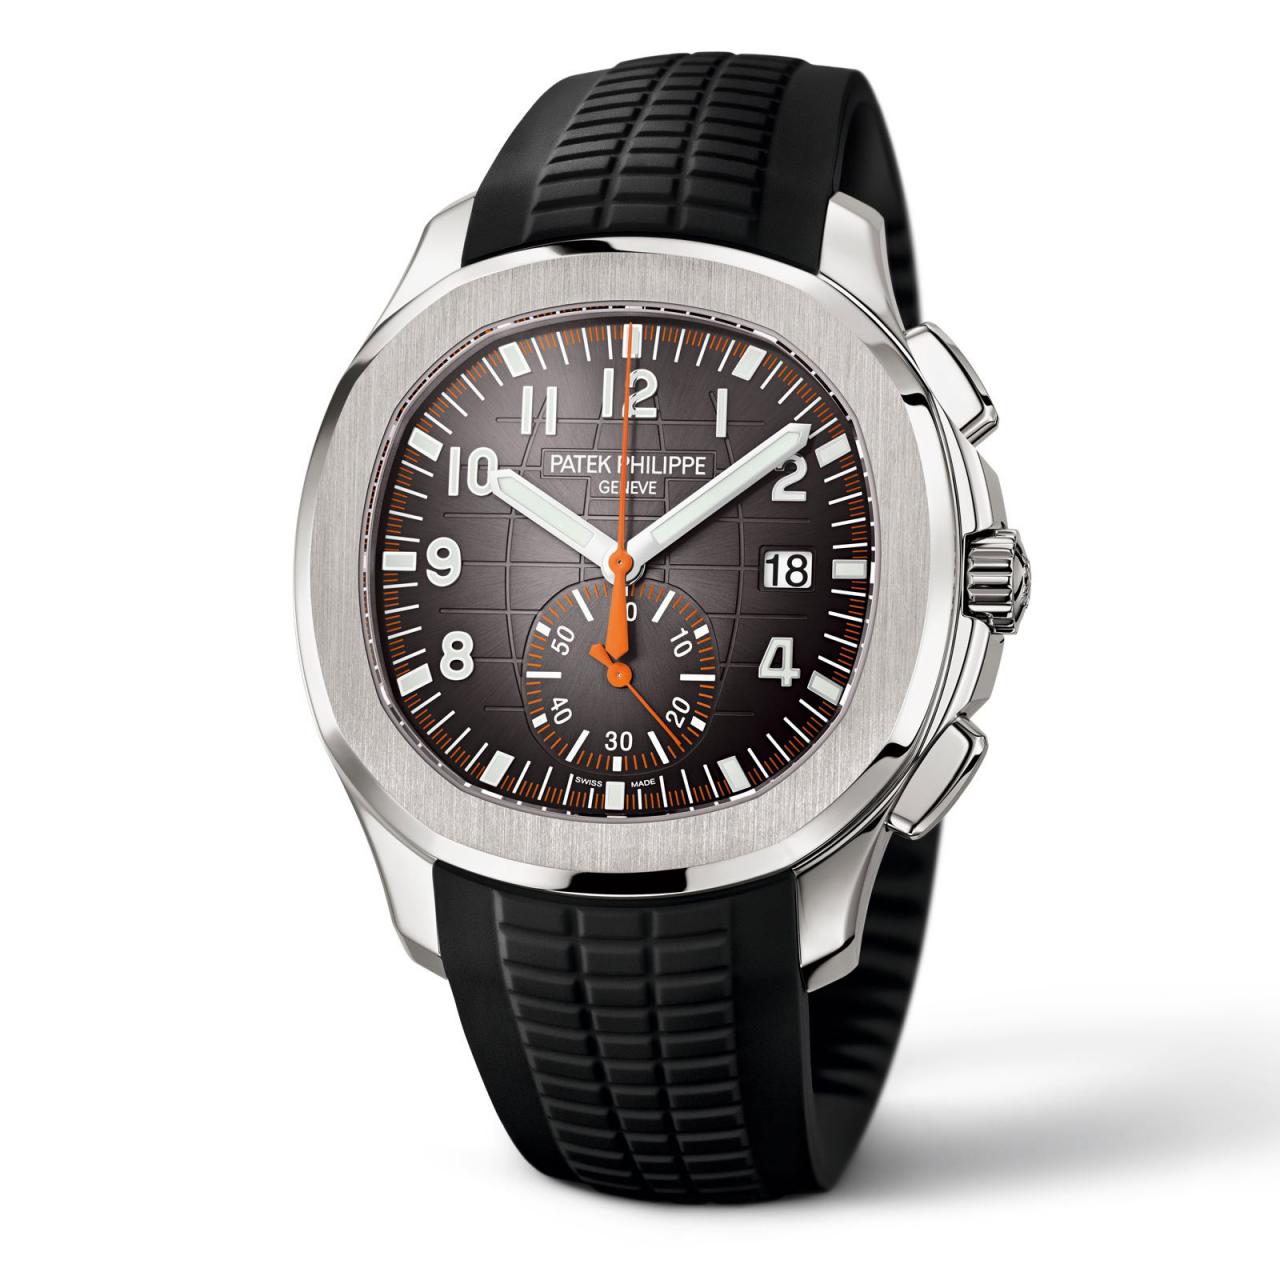 Baselworld 2018: Patek Philippe Introduces the Aquanaut Chronograph Ref. 5968A